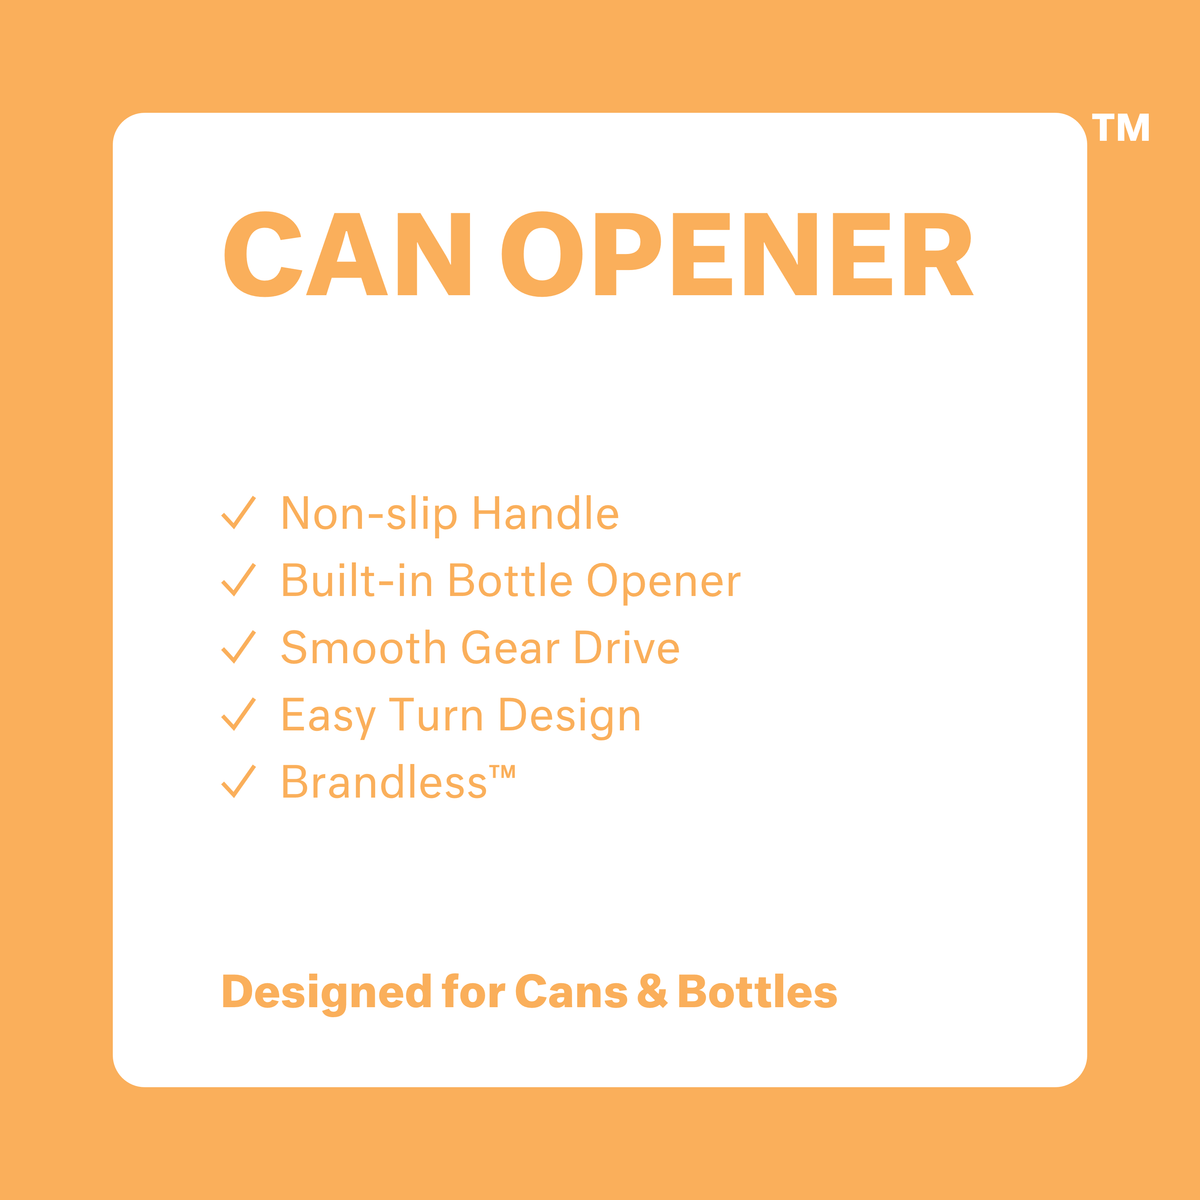 Can opener.  non-slip handle, built-in bottle opener, smooth gear drive, easy turn design, brandless. Designed for cans and bottles.